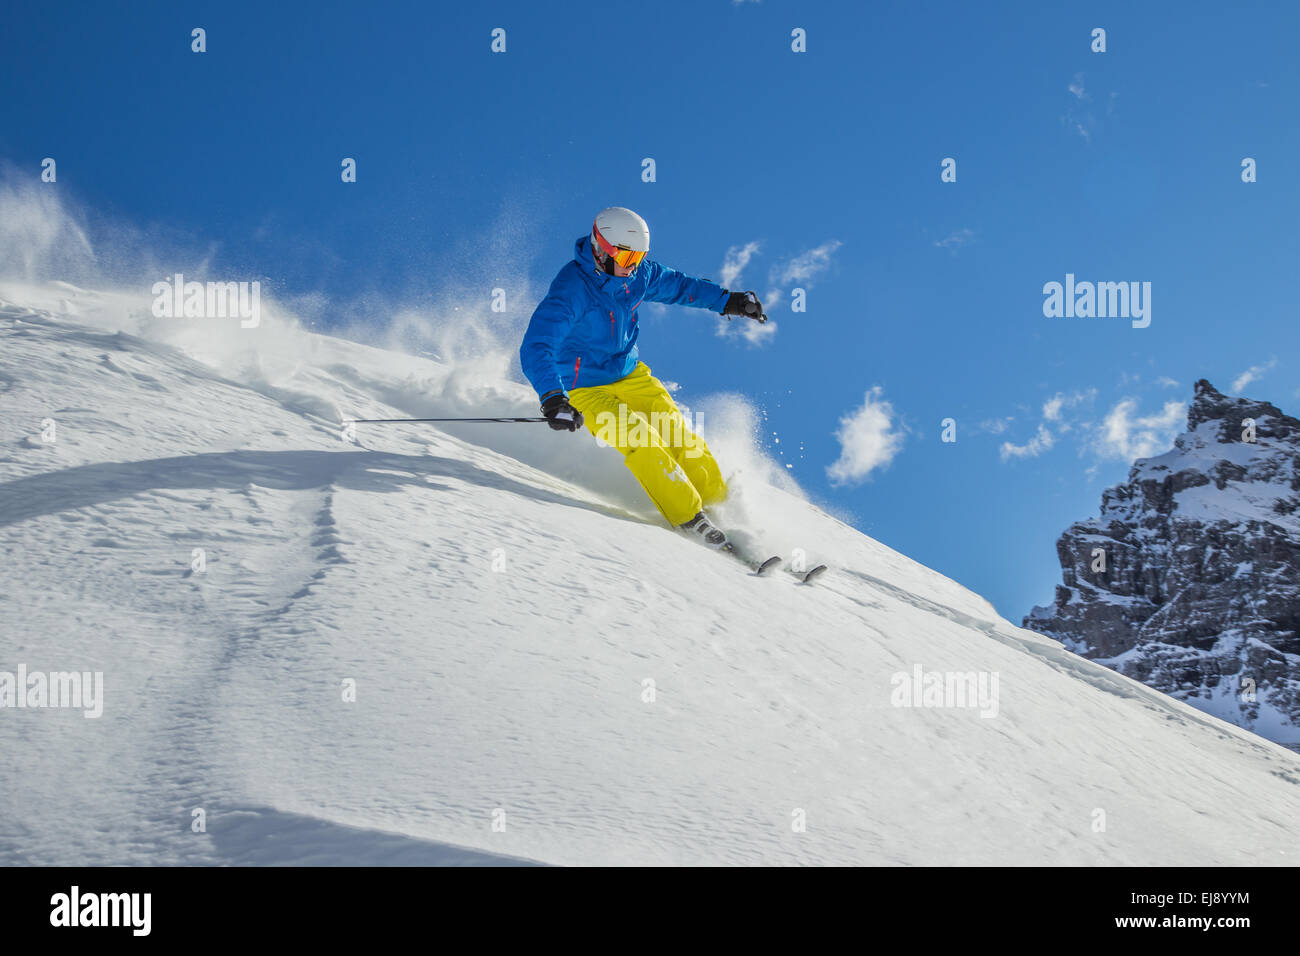 Skier skiing downhill in high mountains during sunny day. Stock Photo